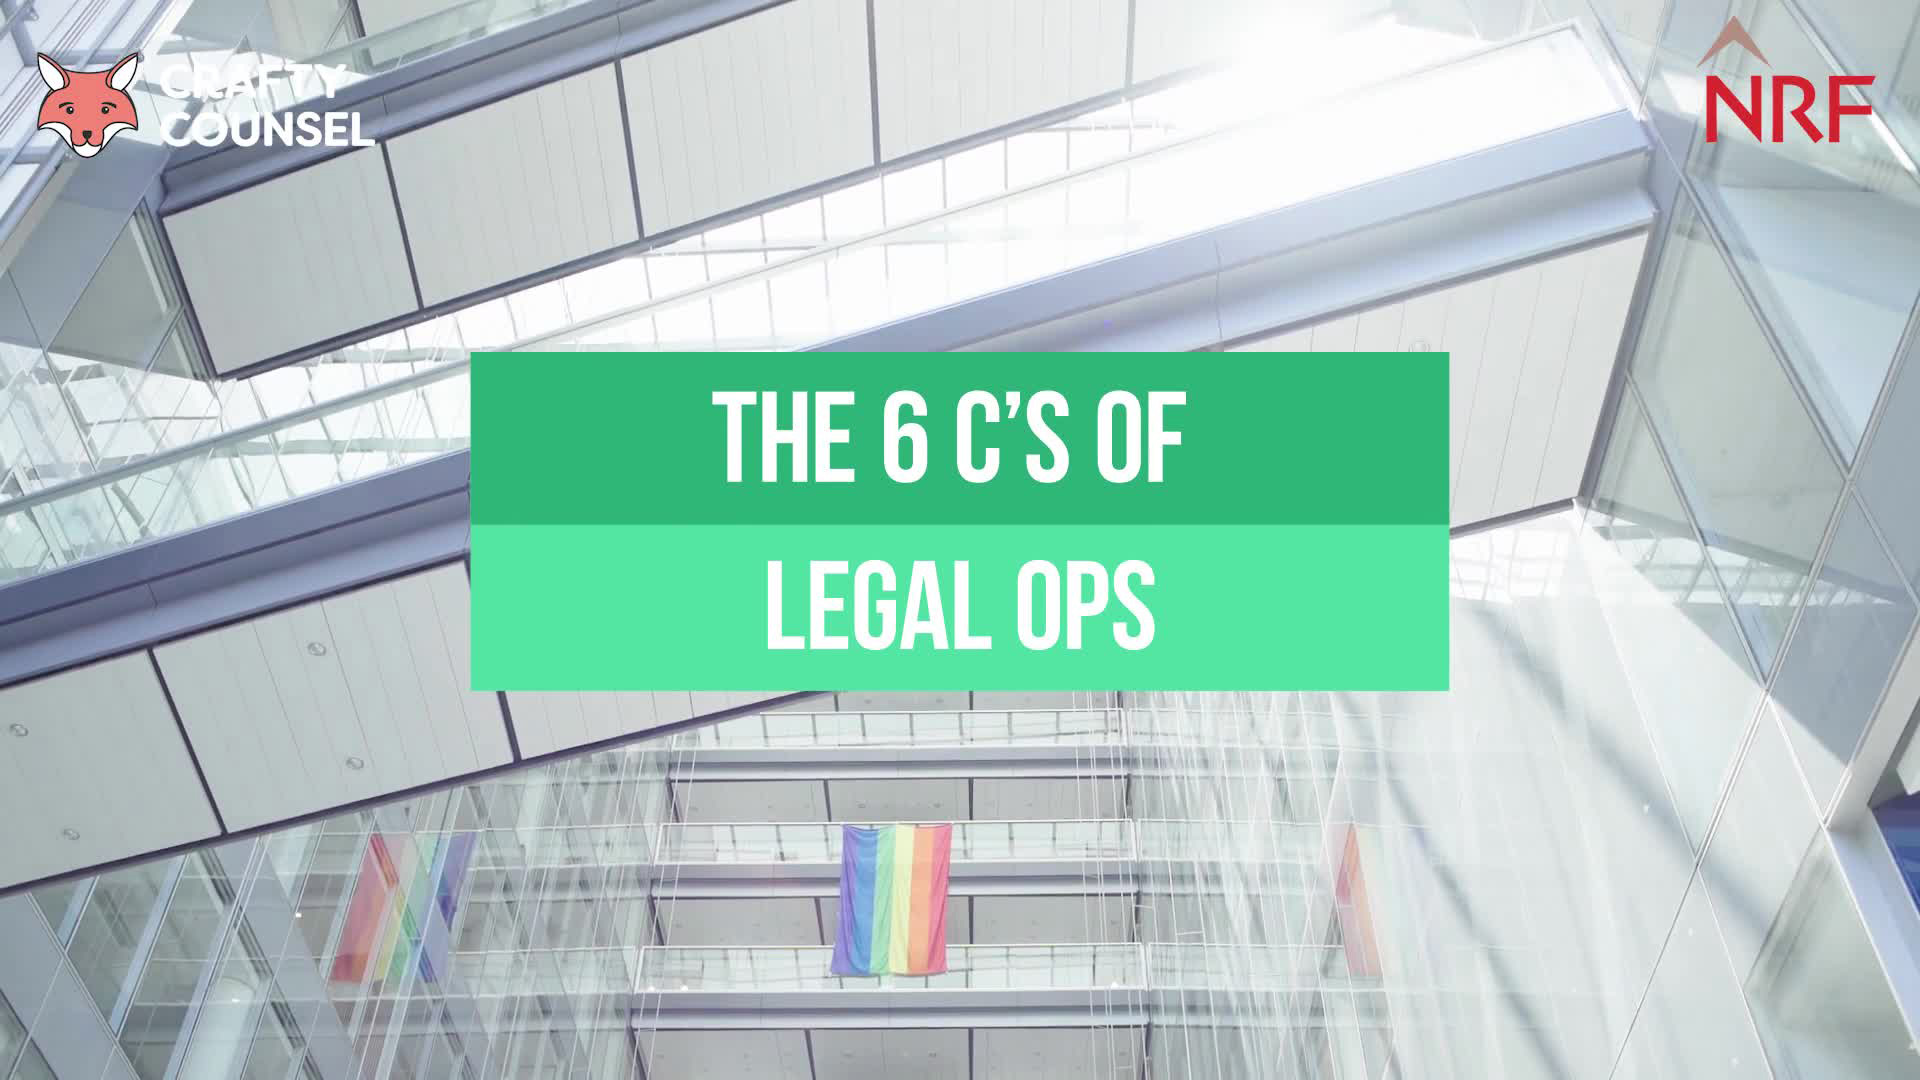 Episode 6: 6 C’s of Legal Ops – Challenge